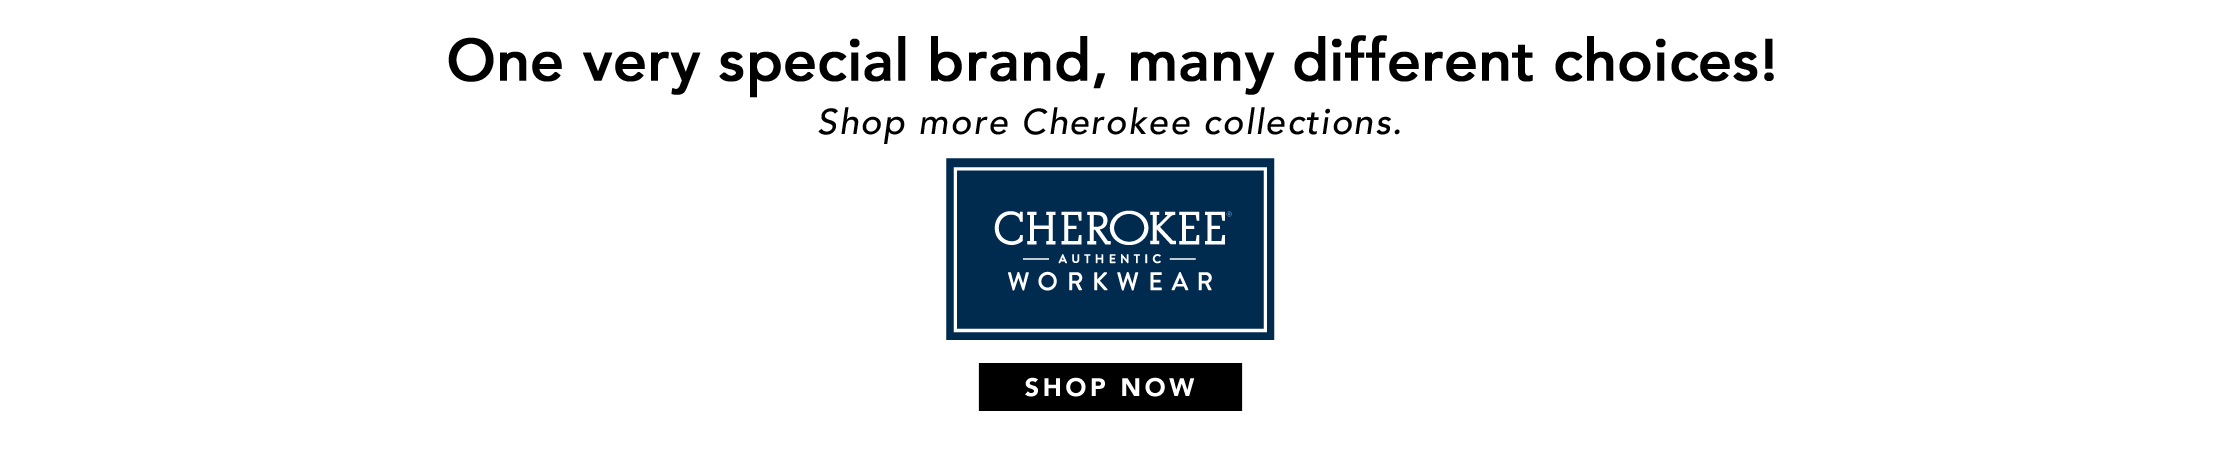 Cherokee Workwear Collections